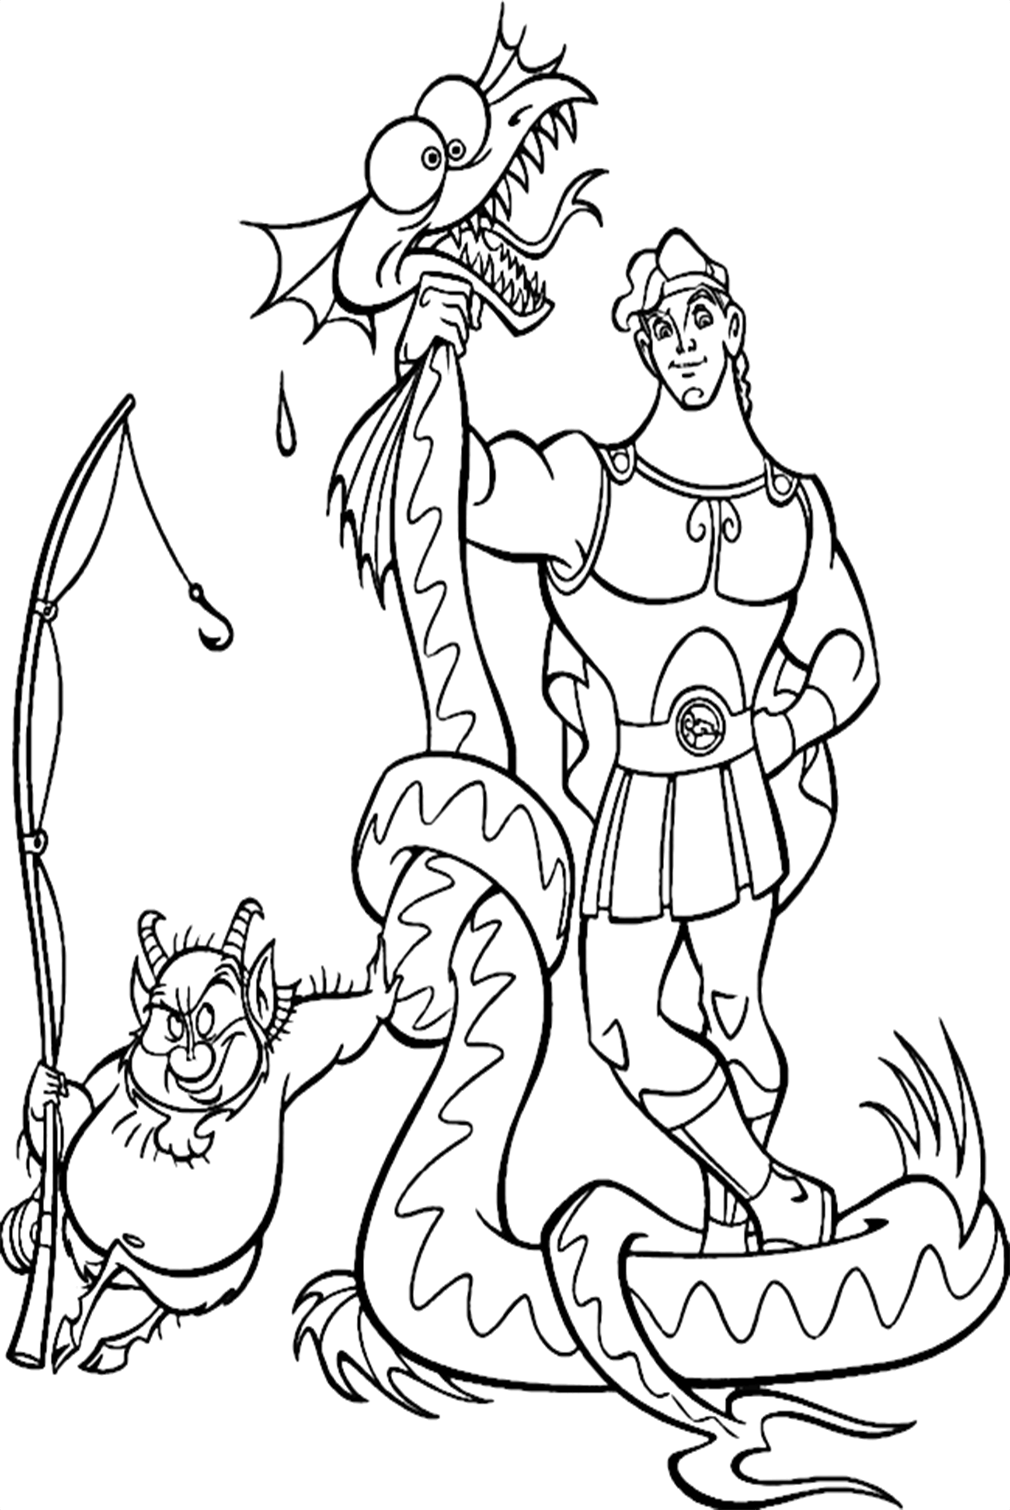 Hydra Coloring Page For Kids